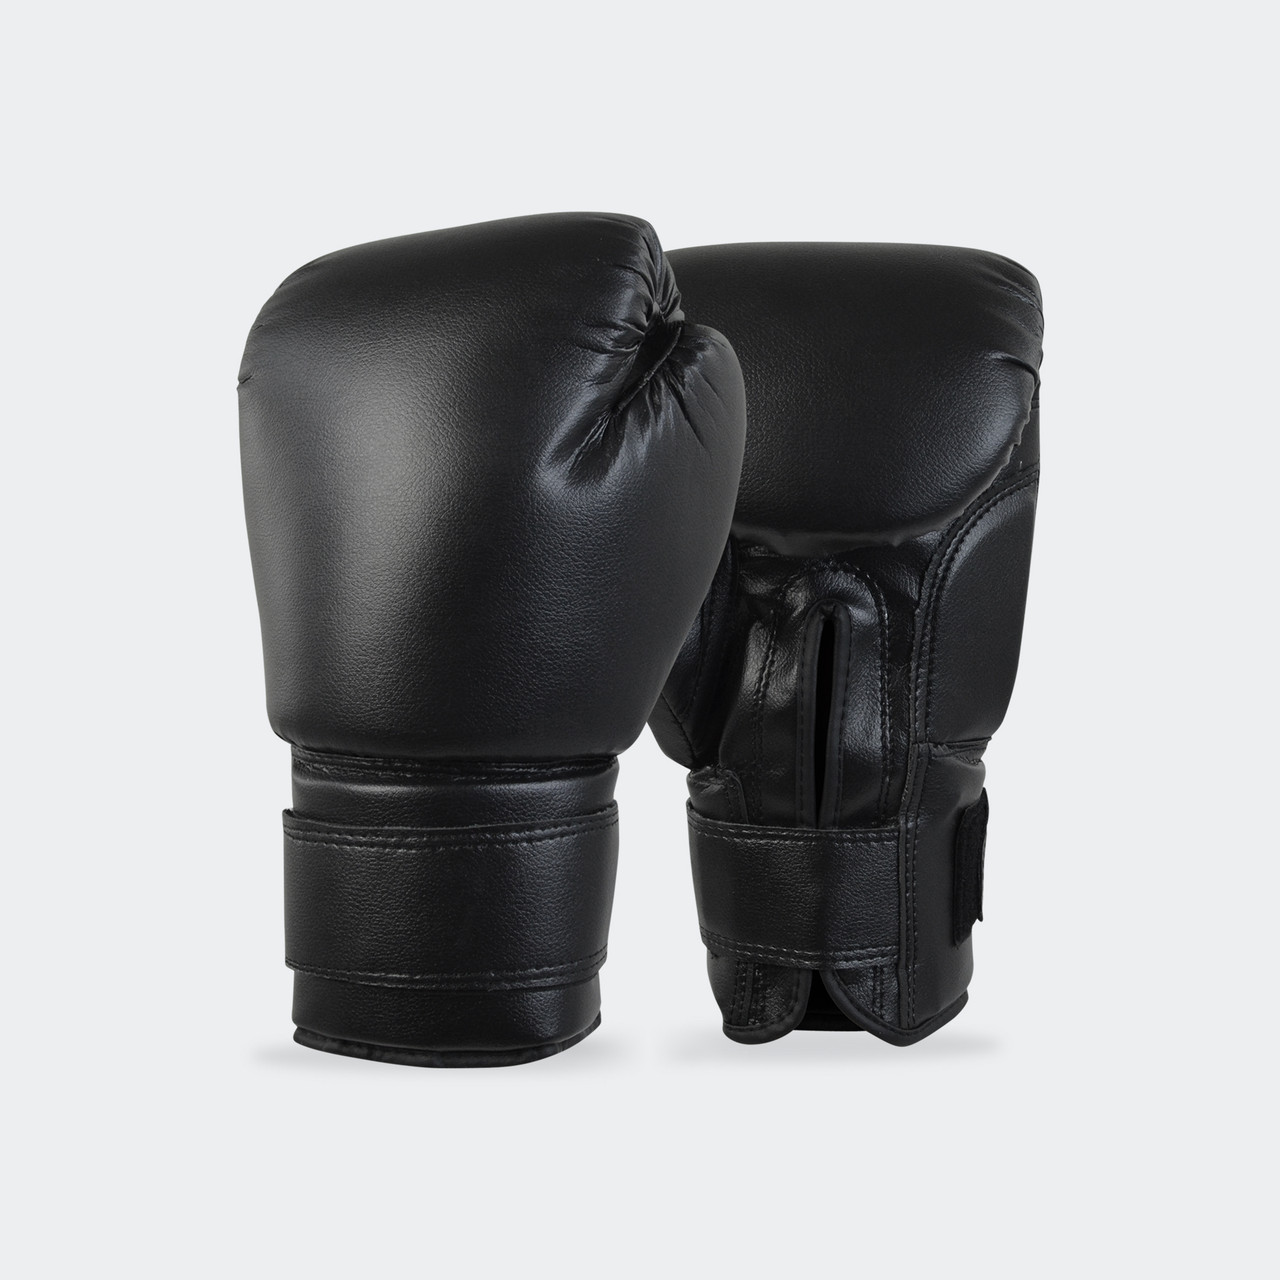 Amazon.com : DRILLS Durable Boxing Training Gloves for Men, Women, & Kids –  Ideal for Kickboxing, MMA, Muay Thai, Sparring, Mitt Work, Punching and Heavy  Bag Workouts, 12 oz- Black : Sports & Outdoors